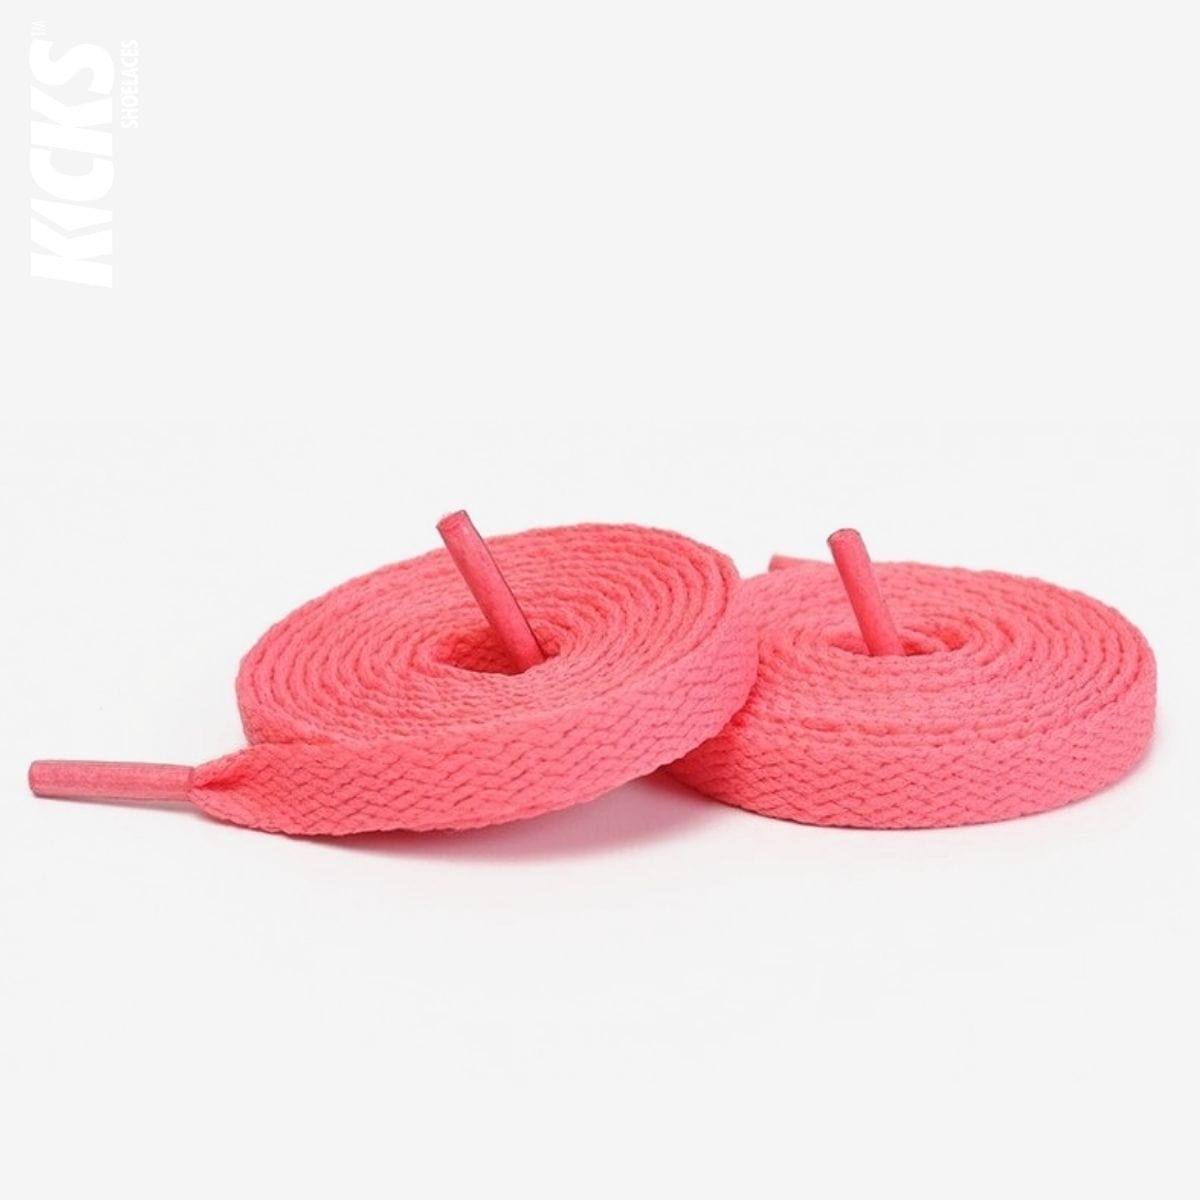 Watermelon Red Replacement Nike Shoe Laces for Air Force 1 Sneakers by Kicks Shoelaces